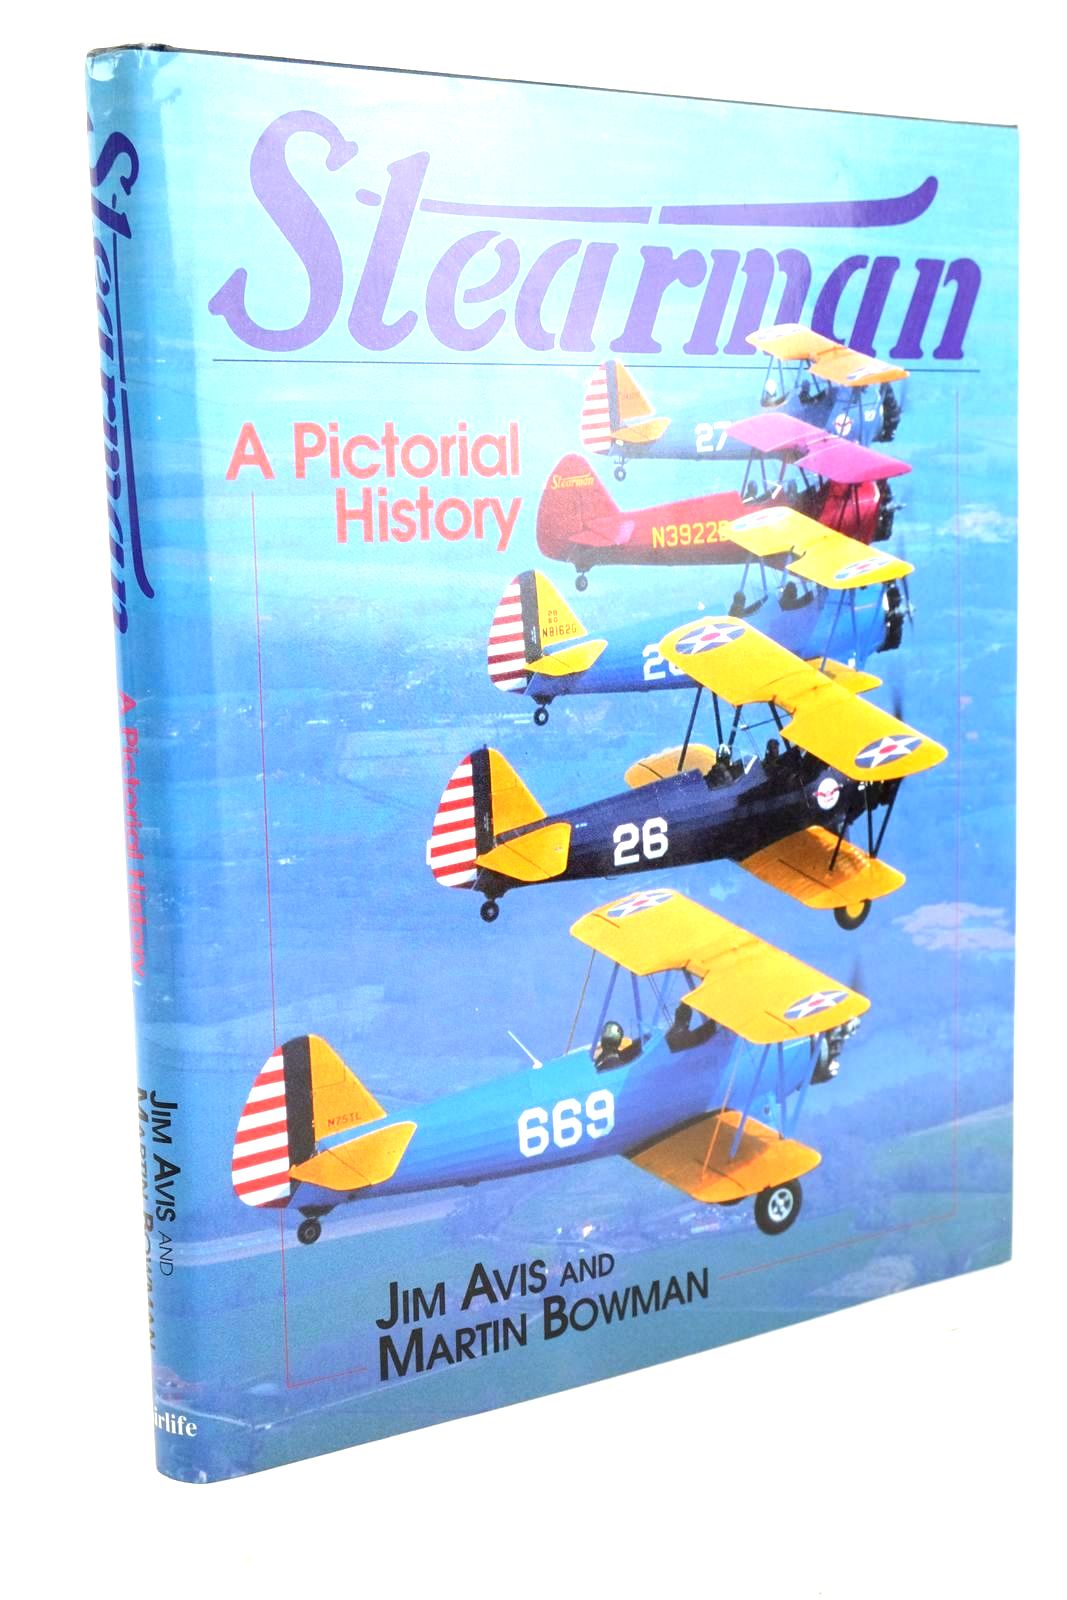 Photo of STEARMAN A PICTORIAL HISTORY written by Avis, Jim Bowman, Martin published by Airlife Publishing Ltd (STOCK CODE: 1326664)  for sale by Stella & Rose's Books